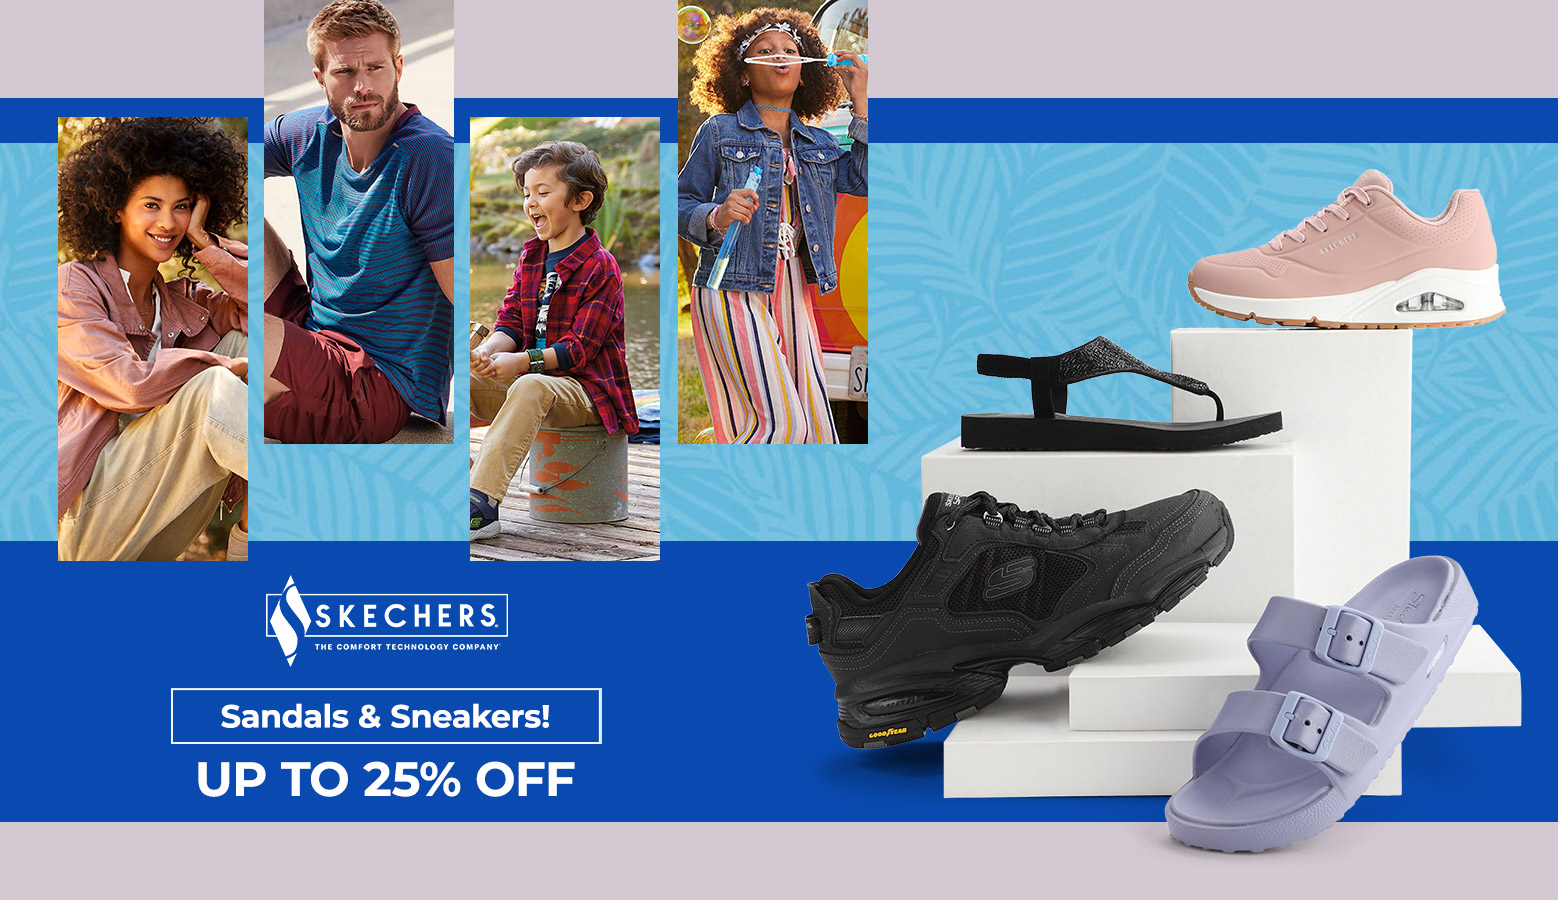 Skechers - Sandals & Sneakers! Up to 25% Off